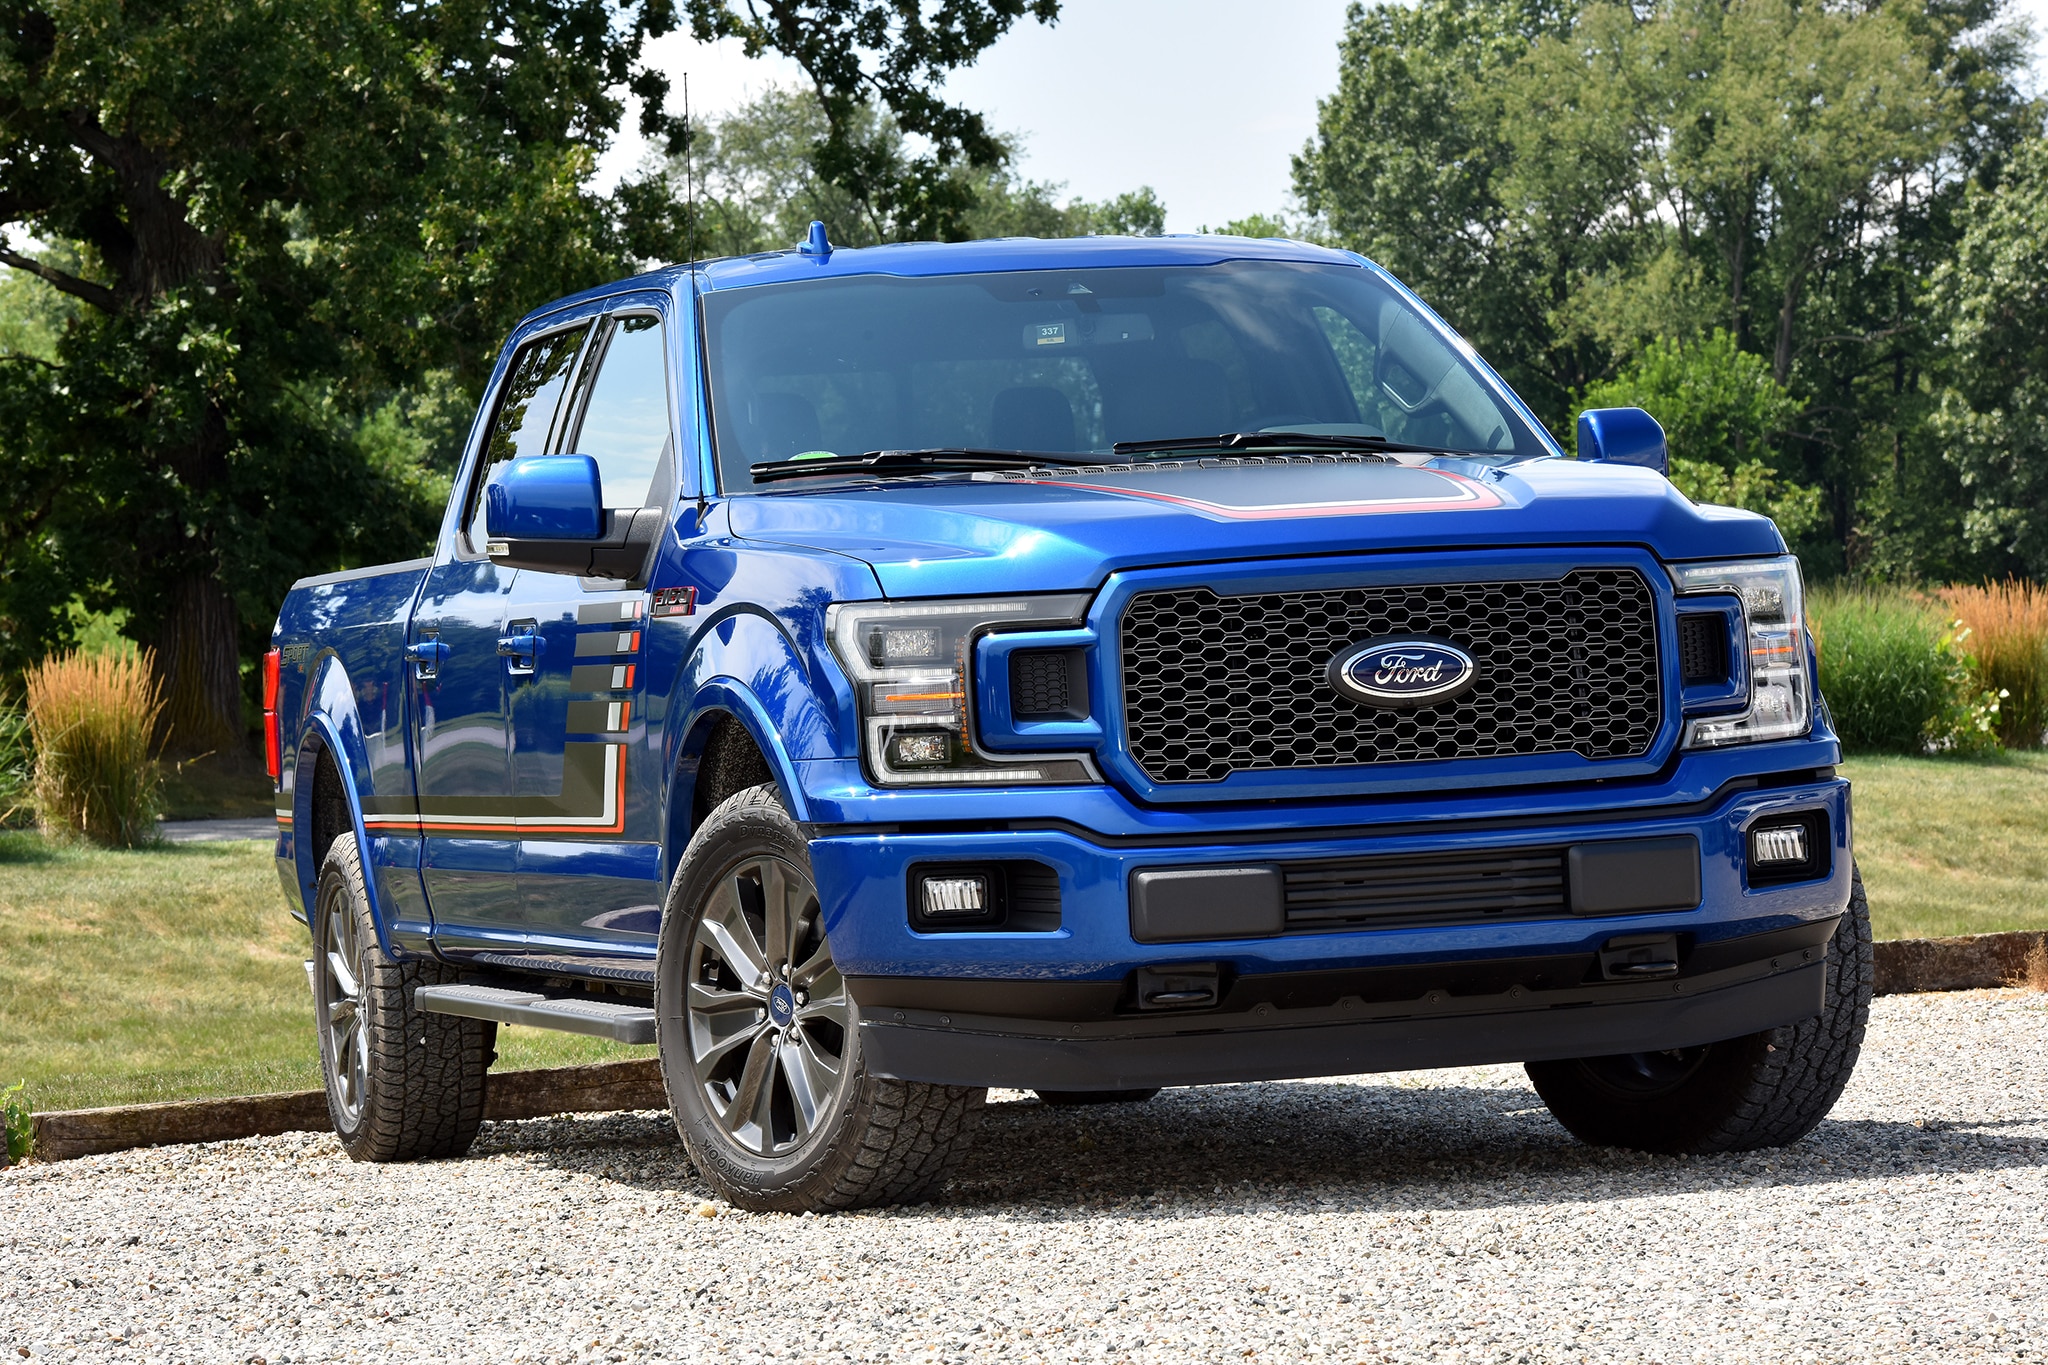 2018-Ford-F-150-front-view-05.jpg